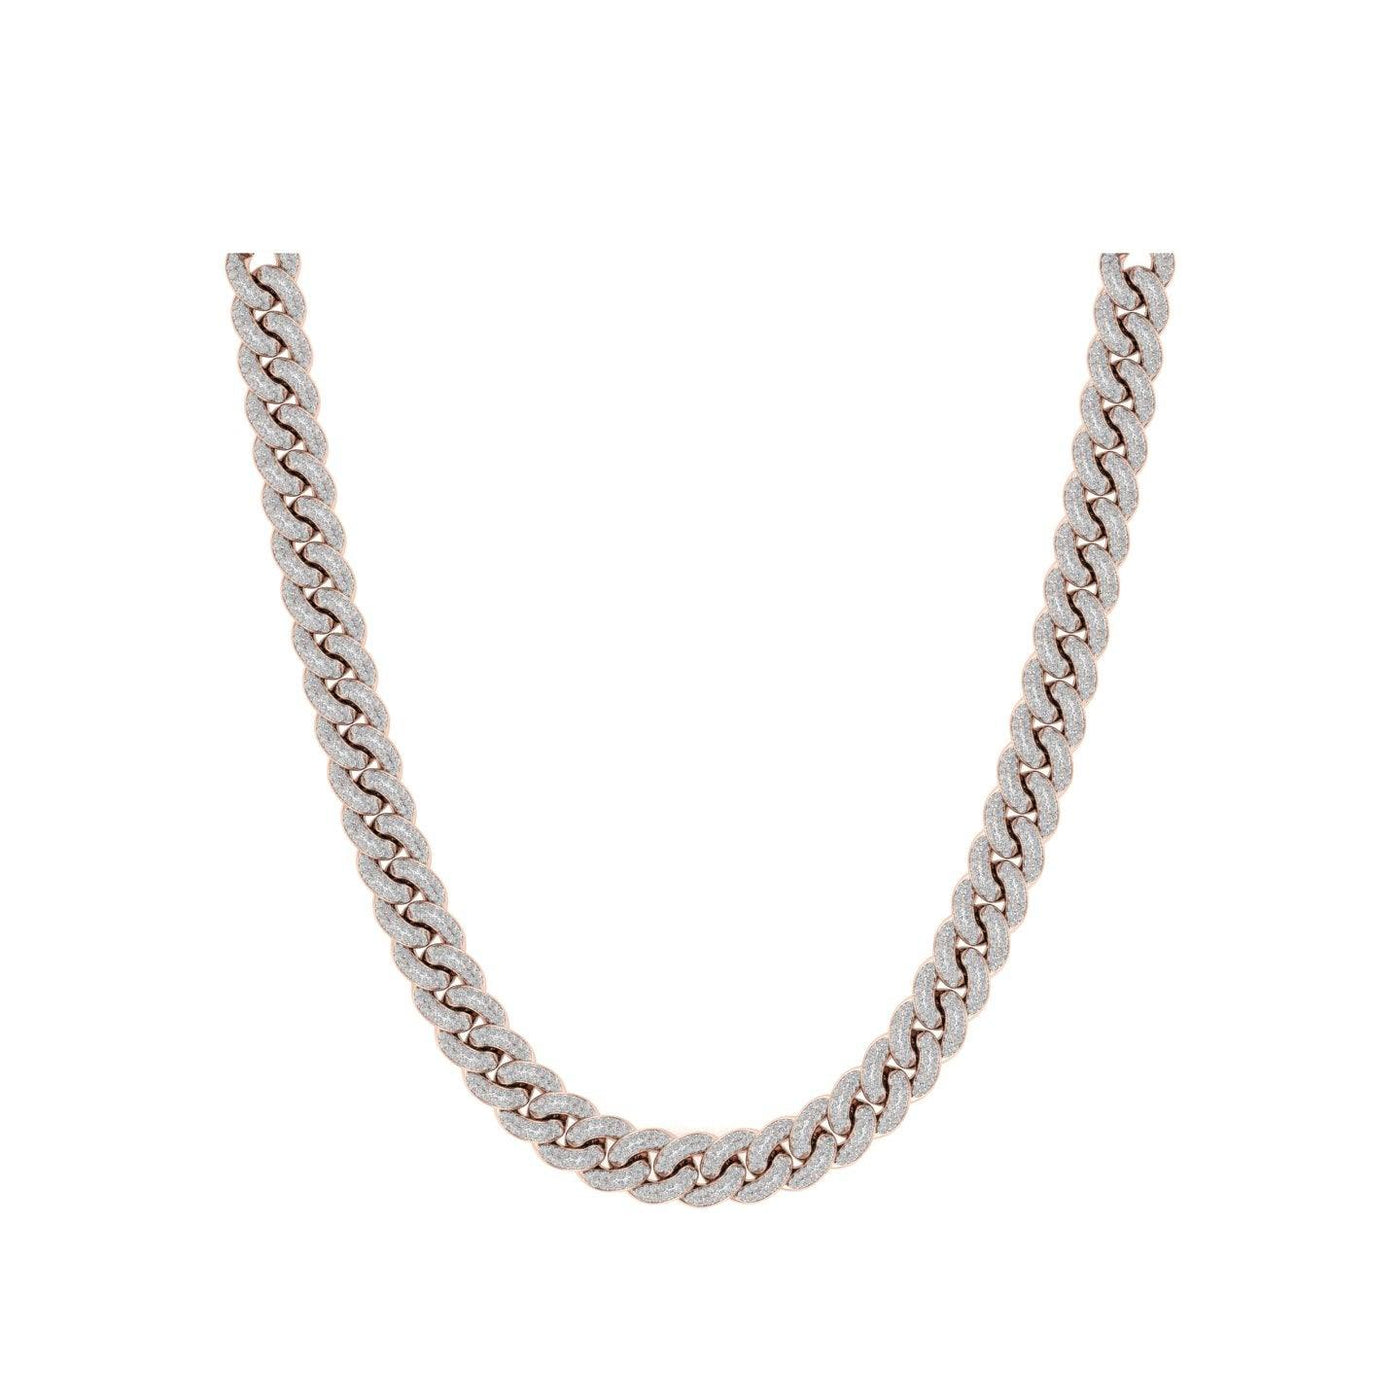 Rose Gold Color 9mm Cuban Chain Made of 925 Sterling Silver Material